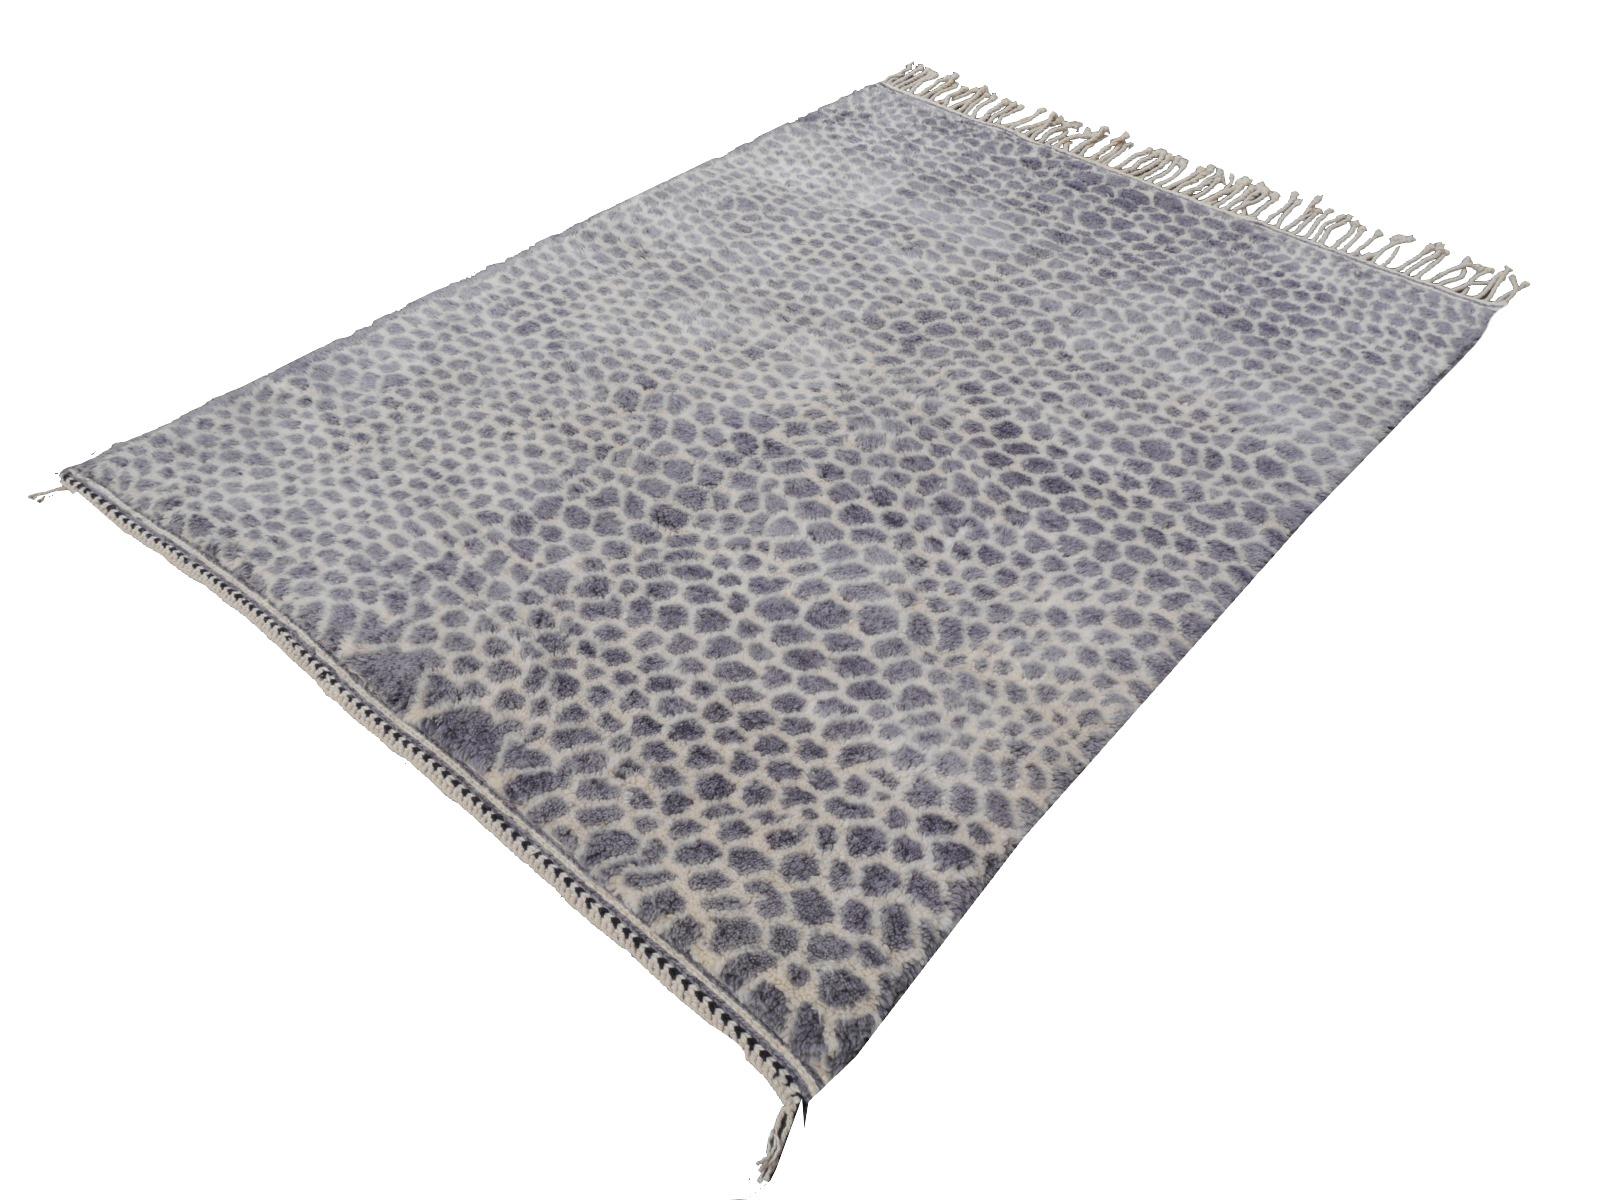 Wool North African Moroccan Berber Rug Leopard Cheetah Design Soft Quality Gray Beige For Sale